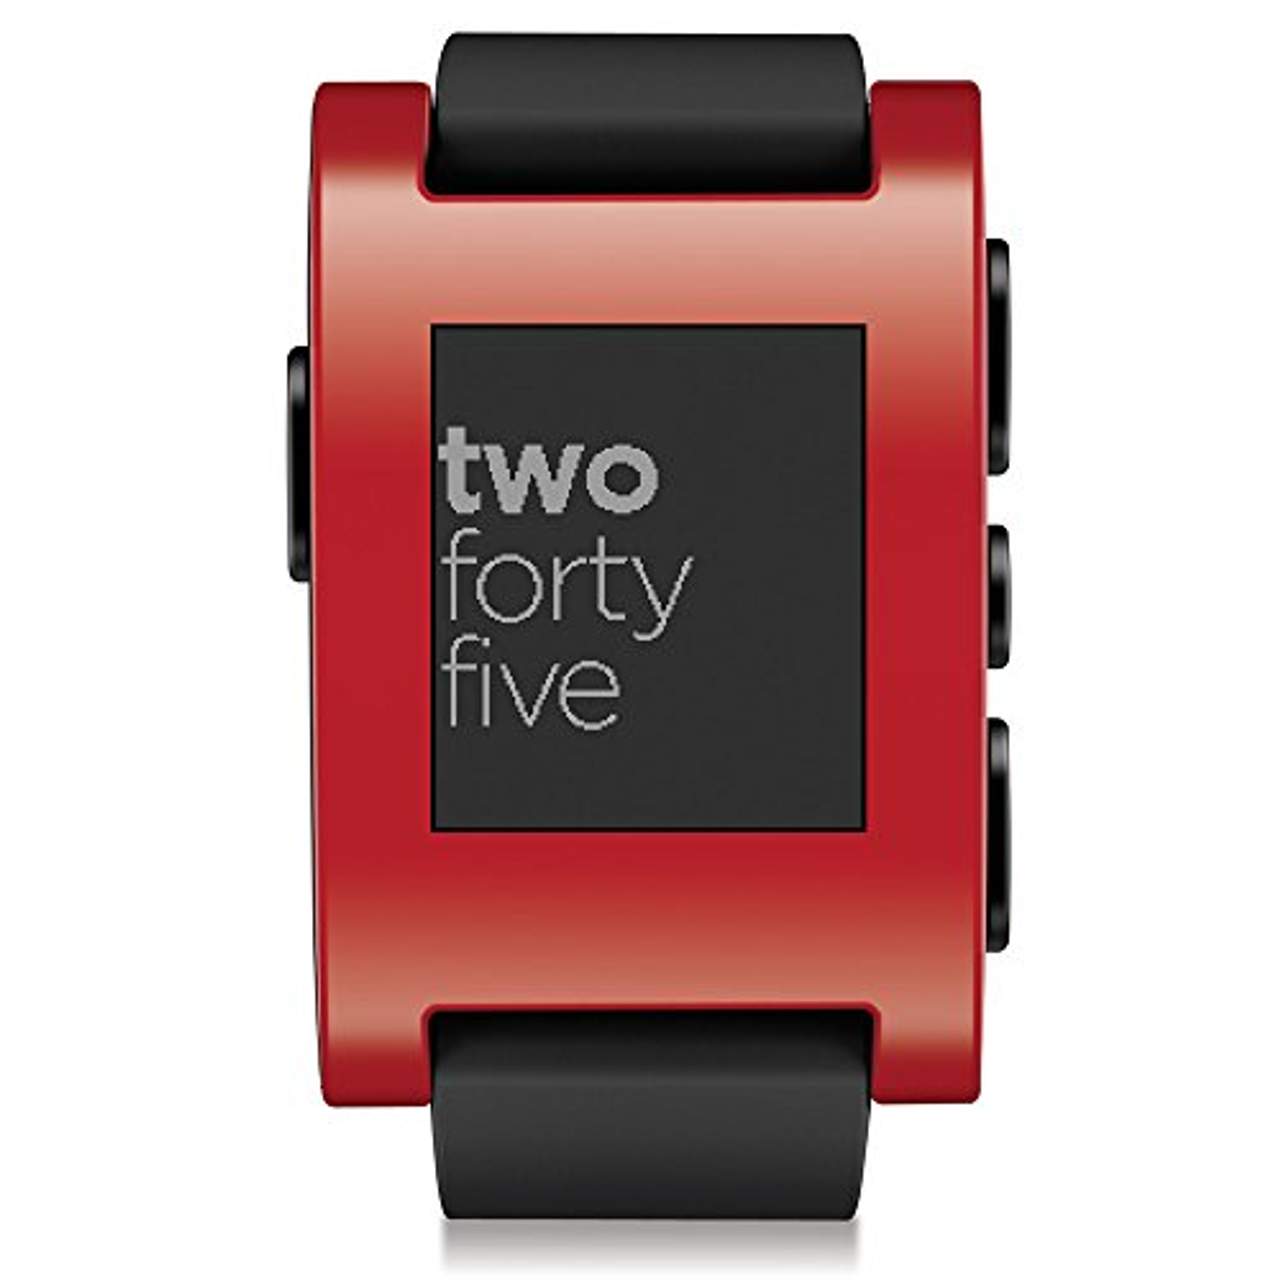 Pebble Smartwatch für iPhone and Android